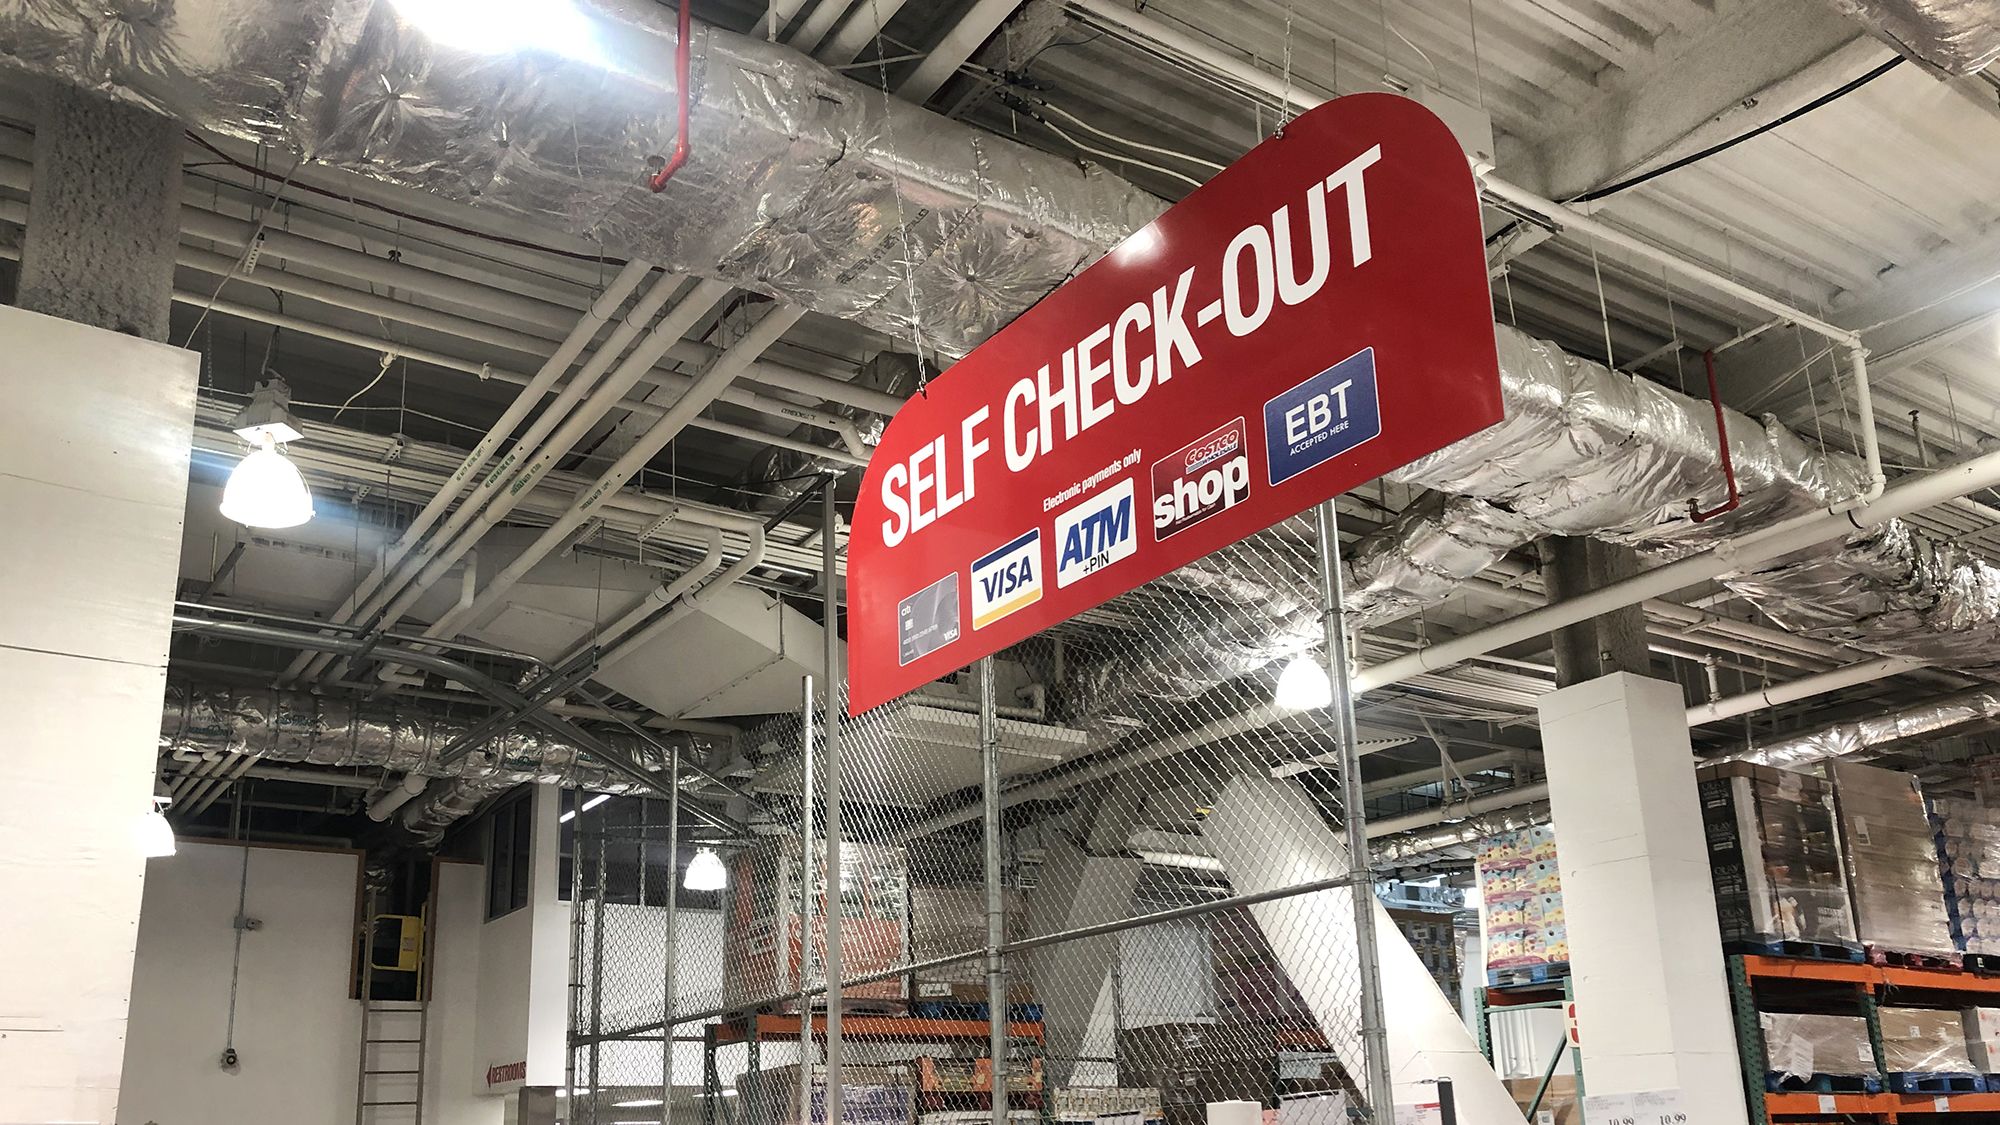 Costco is adding more staff to self-checkout areas. (Lindsey Nicholson/UCG/Universal Images Group/G...